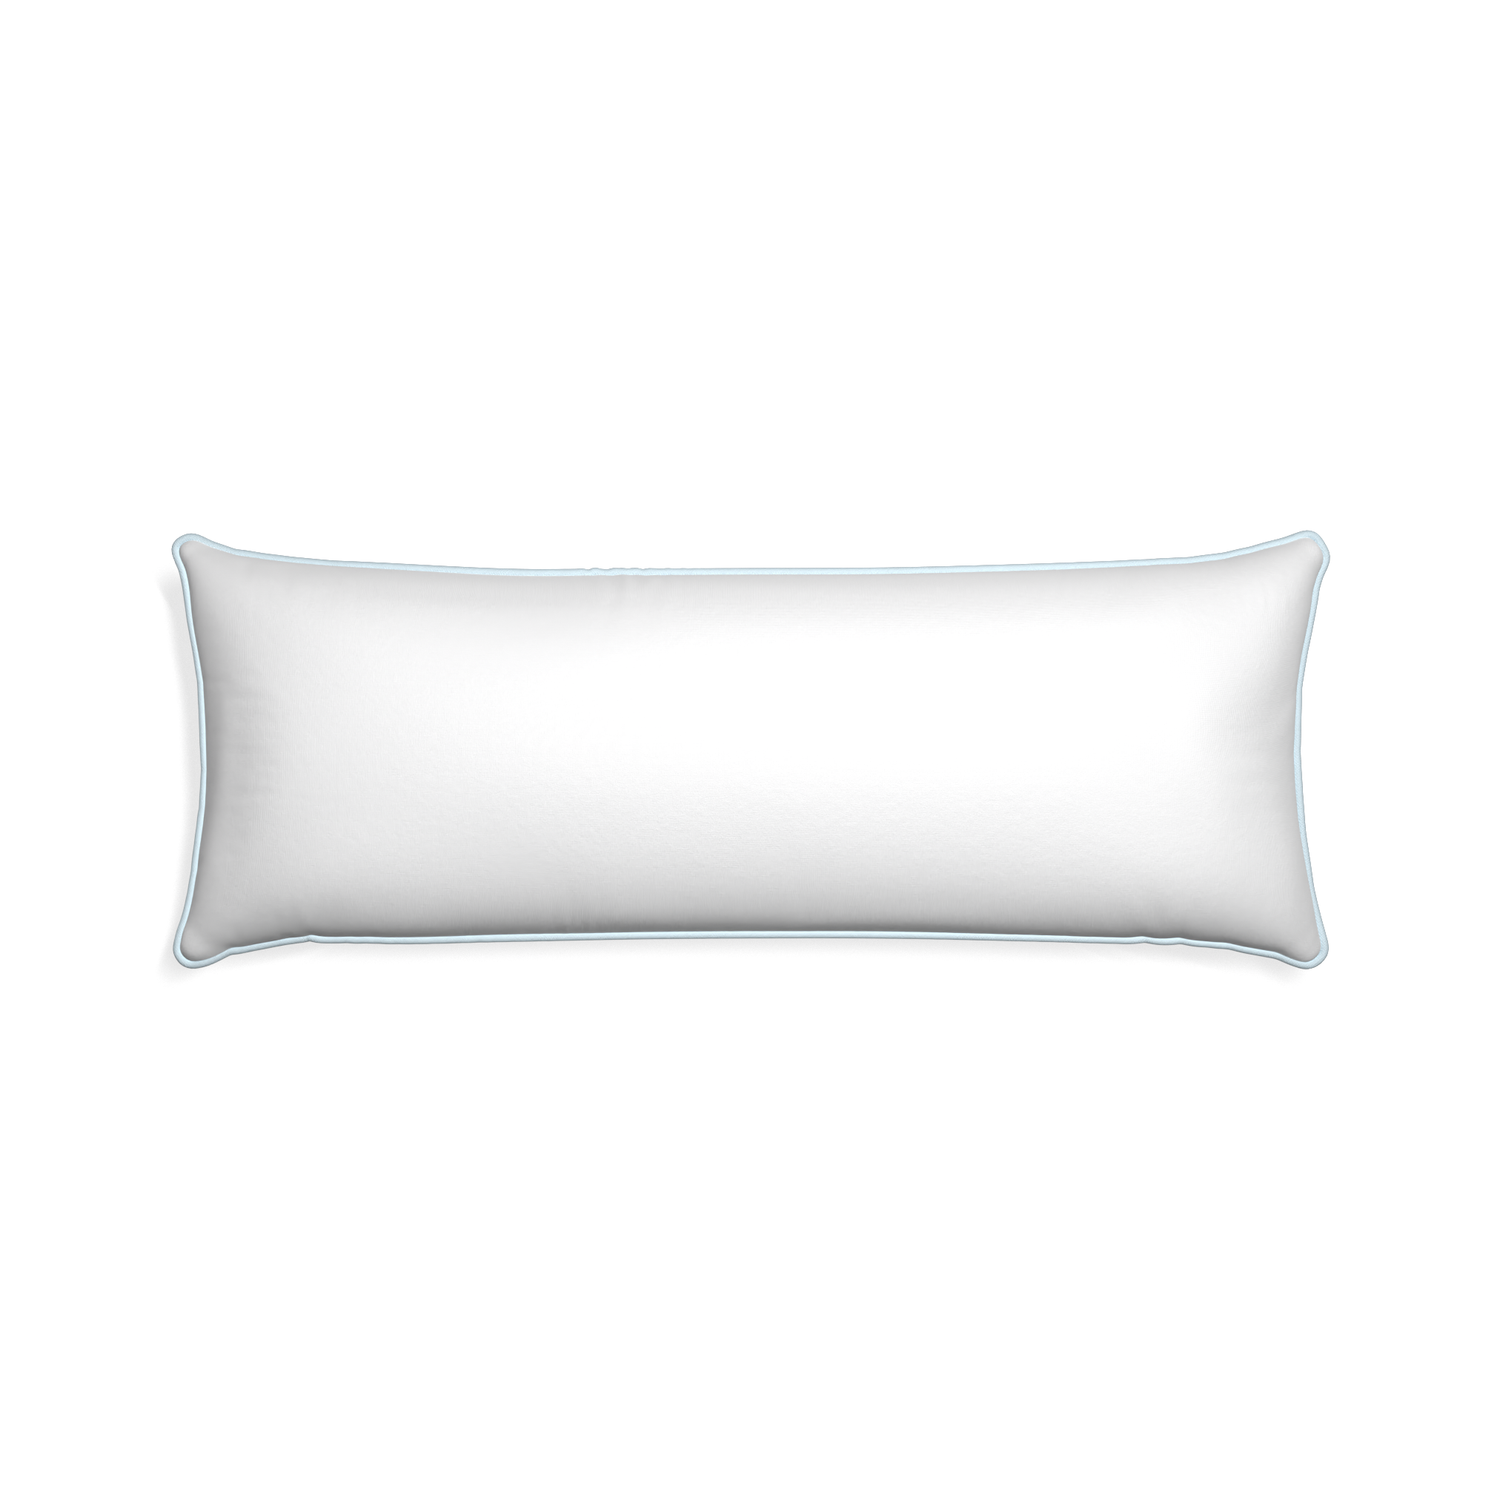 Xl-lumbar snow custom white cottonpillow with powder piping on white background